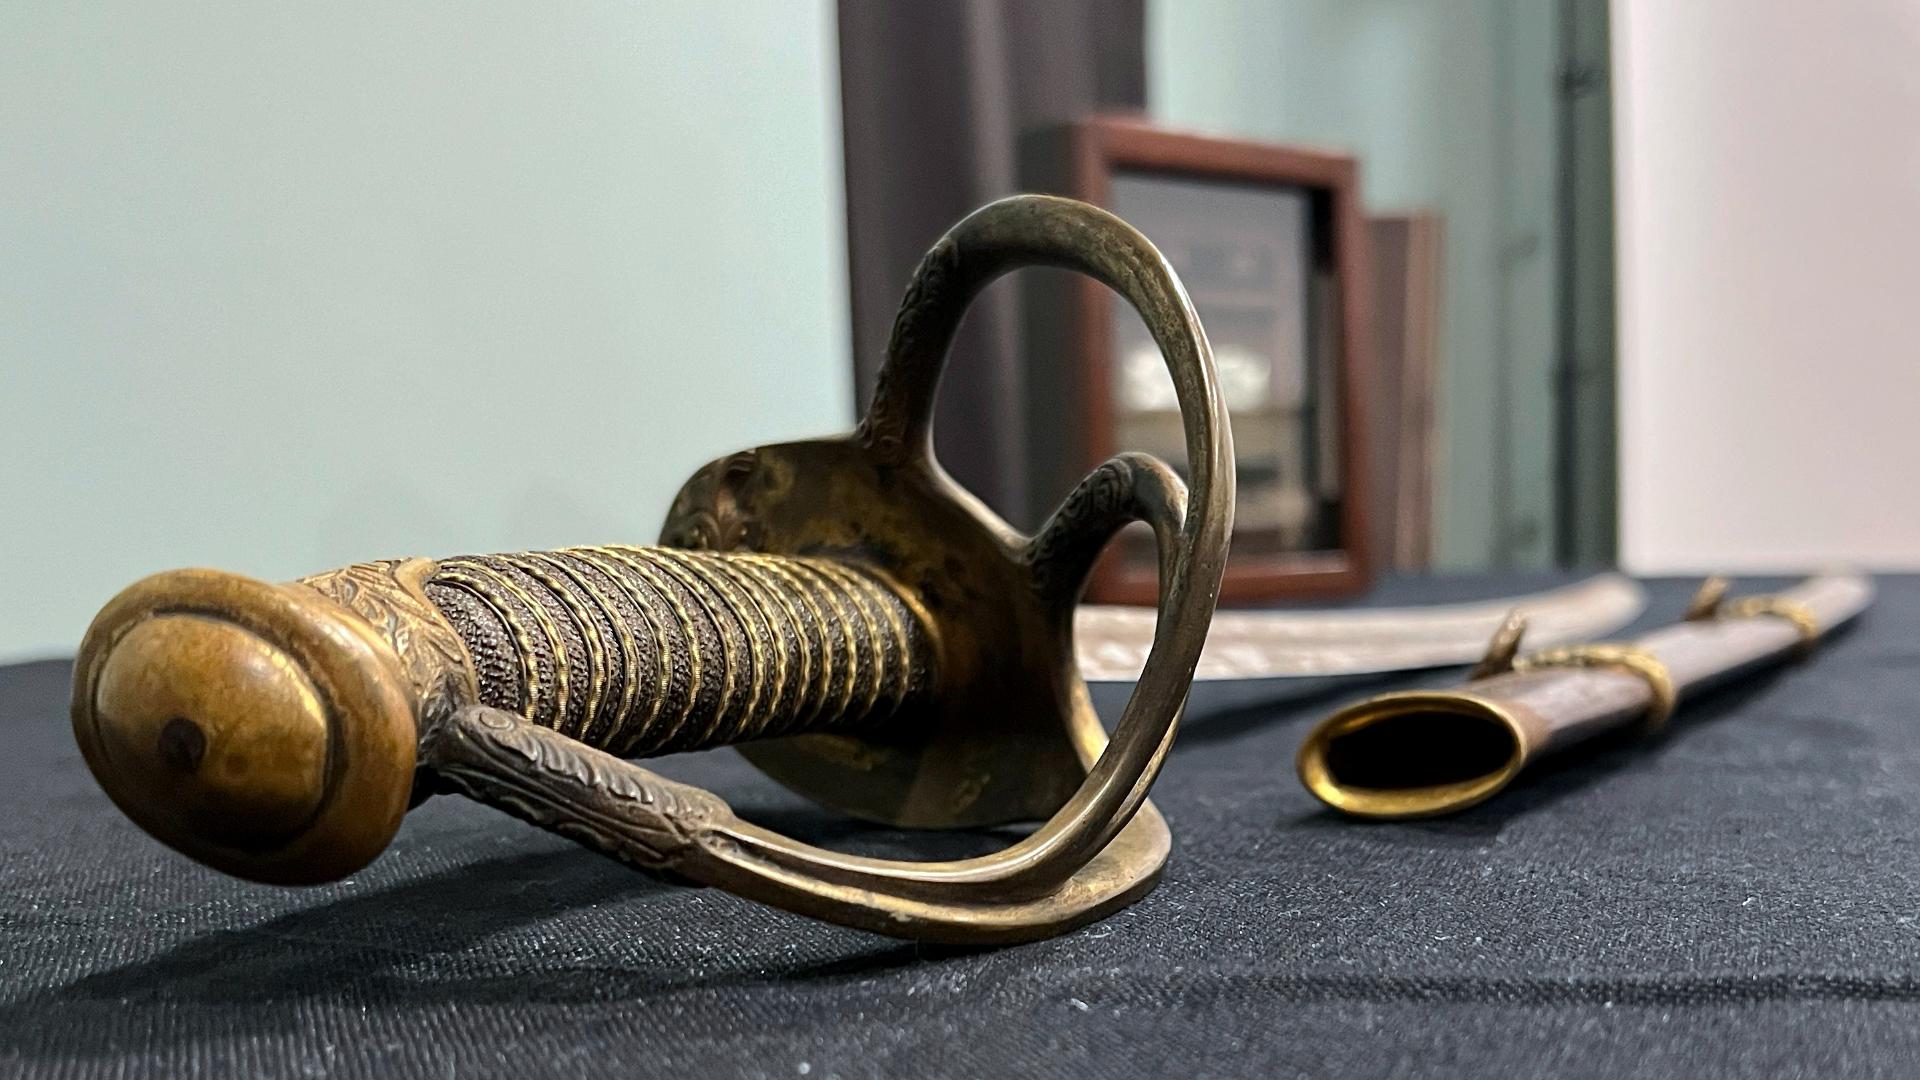 General William Tecumseh Sherman’s wartime sword, likely used between 1861 and 1863, are among the items that will be open to bidders at Fleischer’s Auctions.